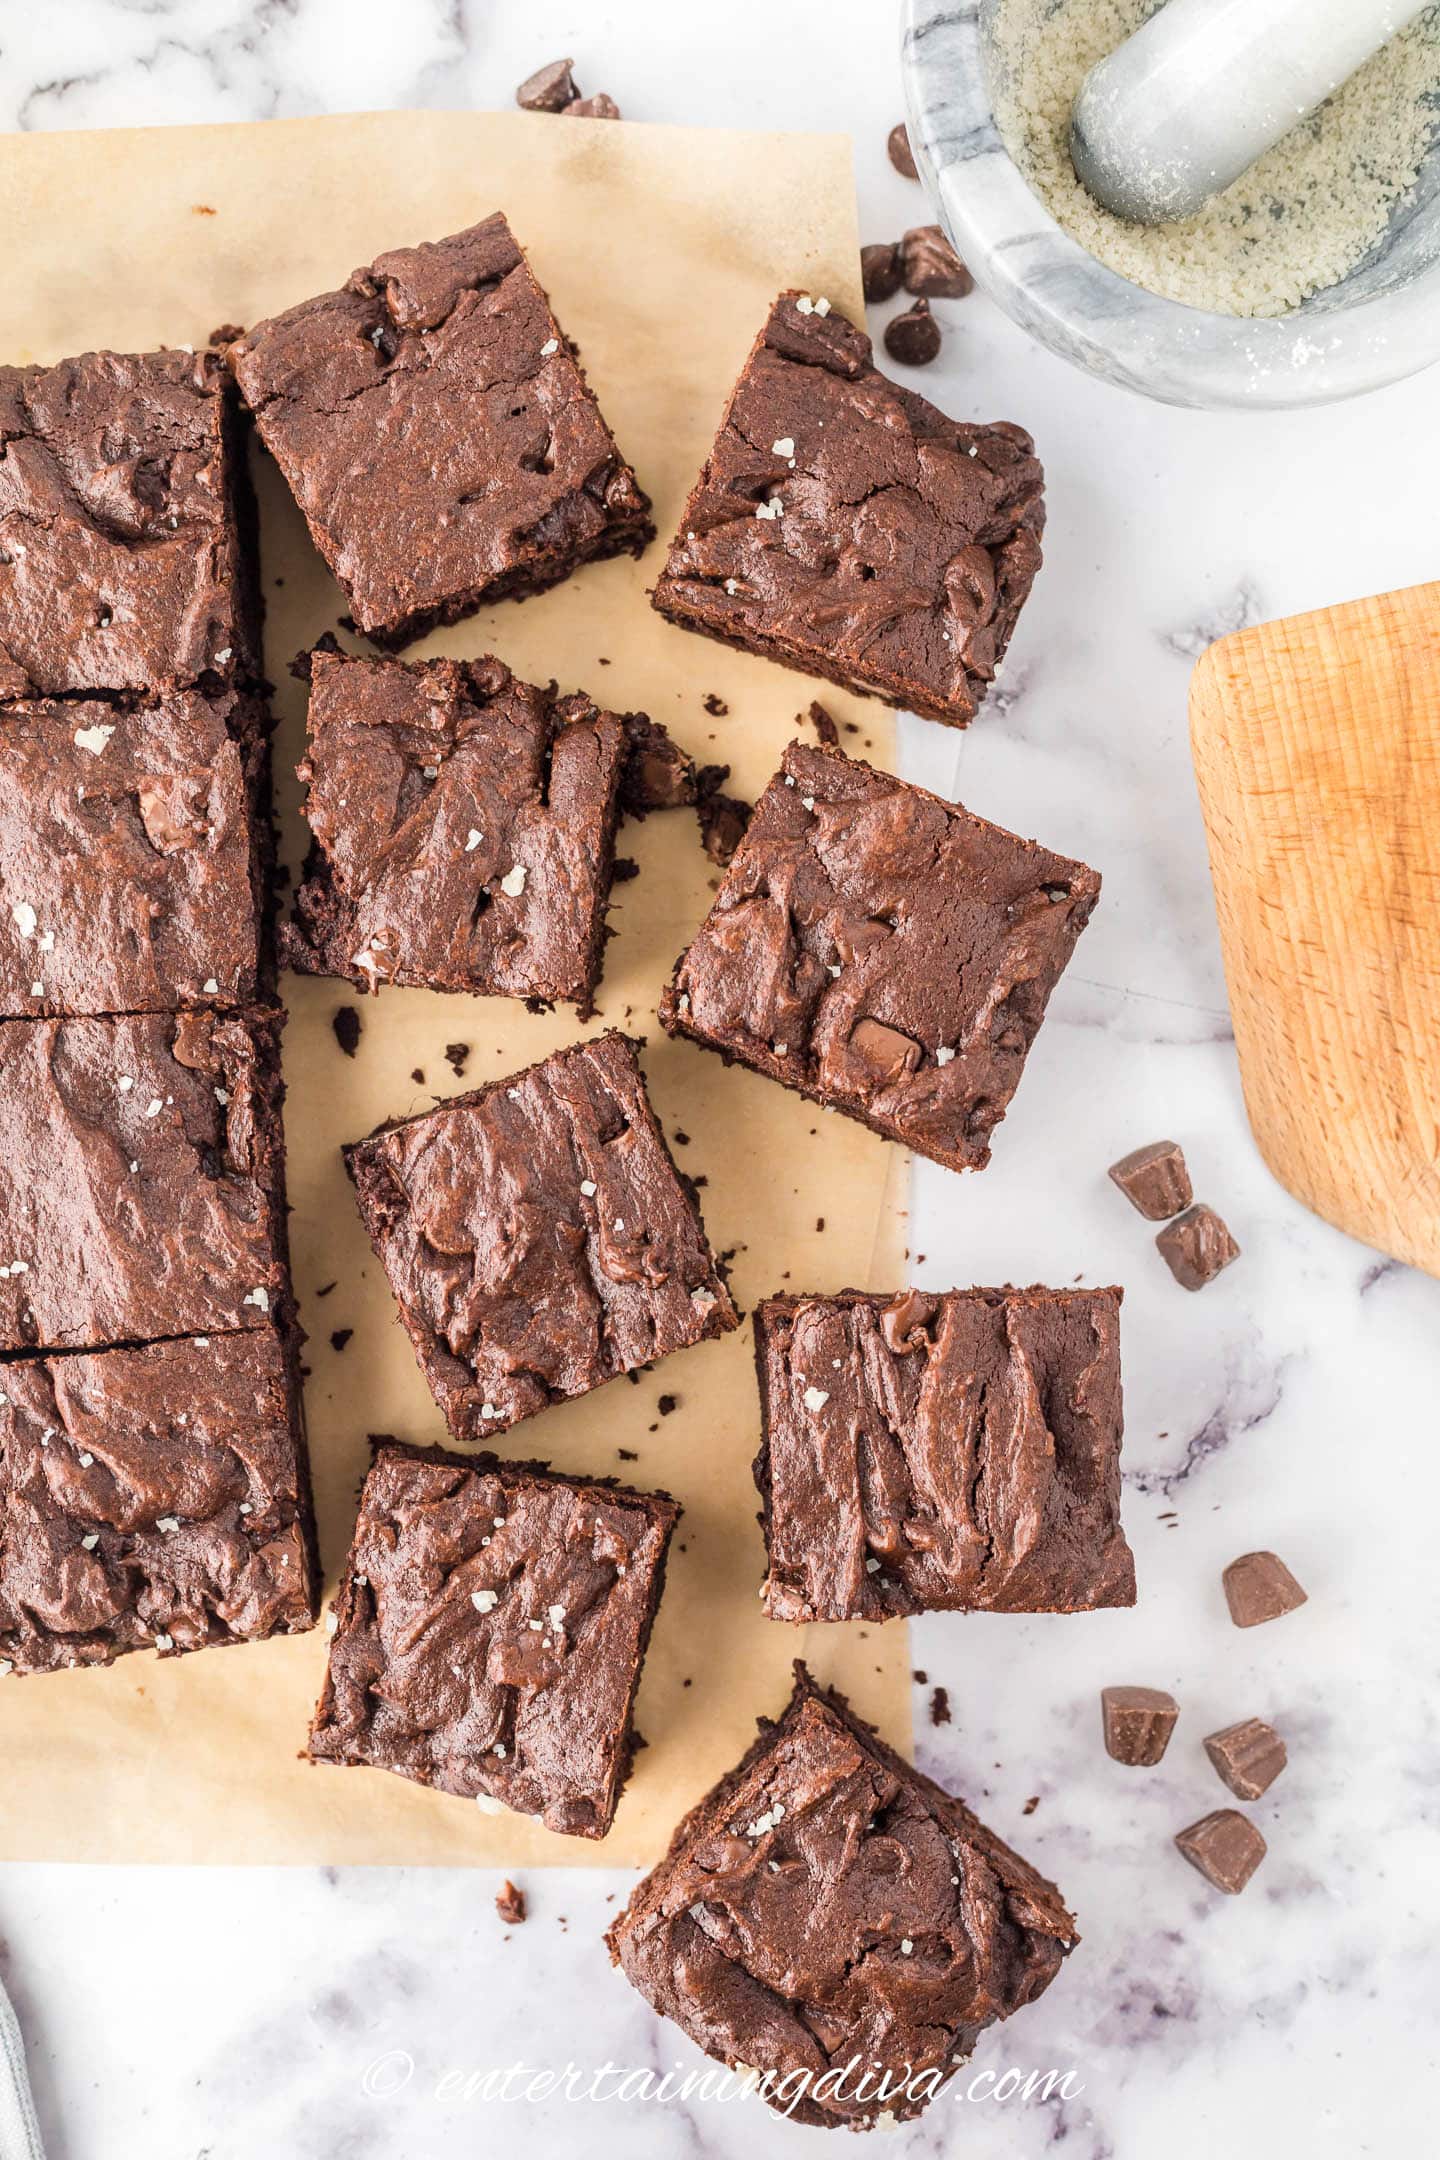 Many brownies spread out on a piece of parchment paper beside a bowl of coarse sea salt